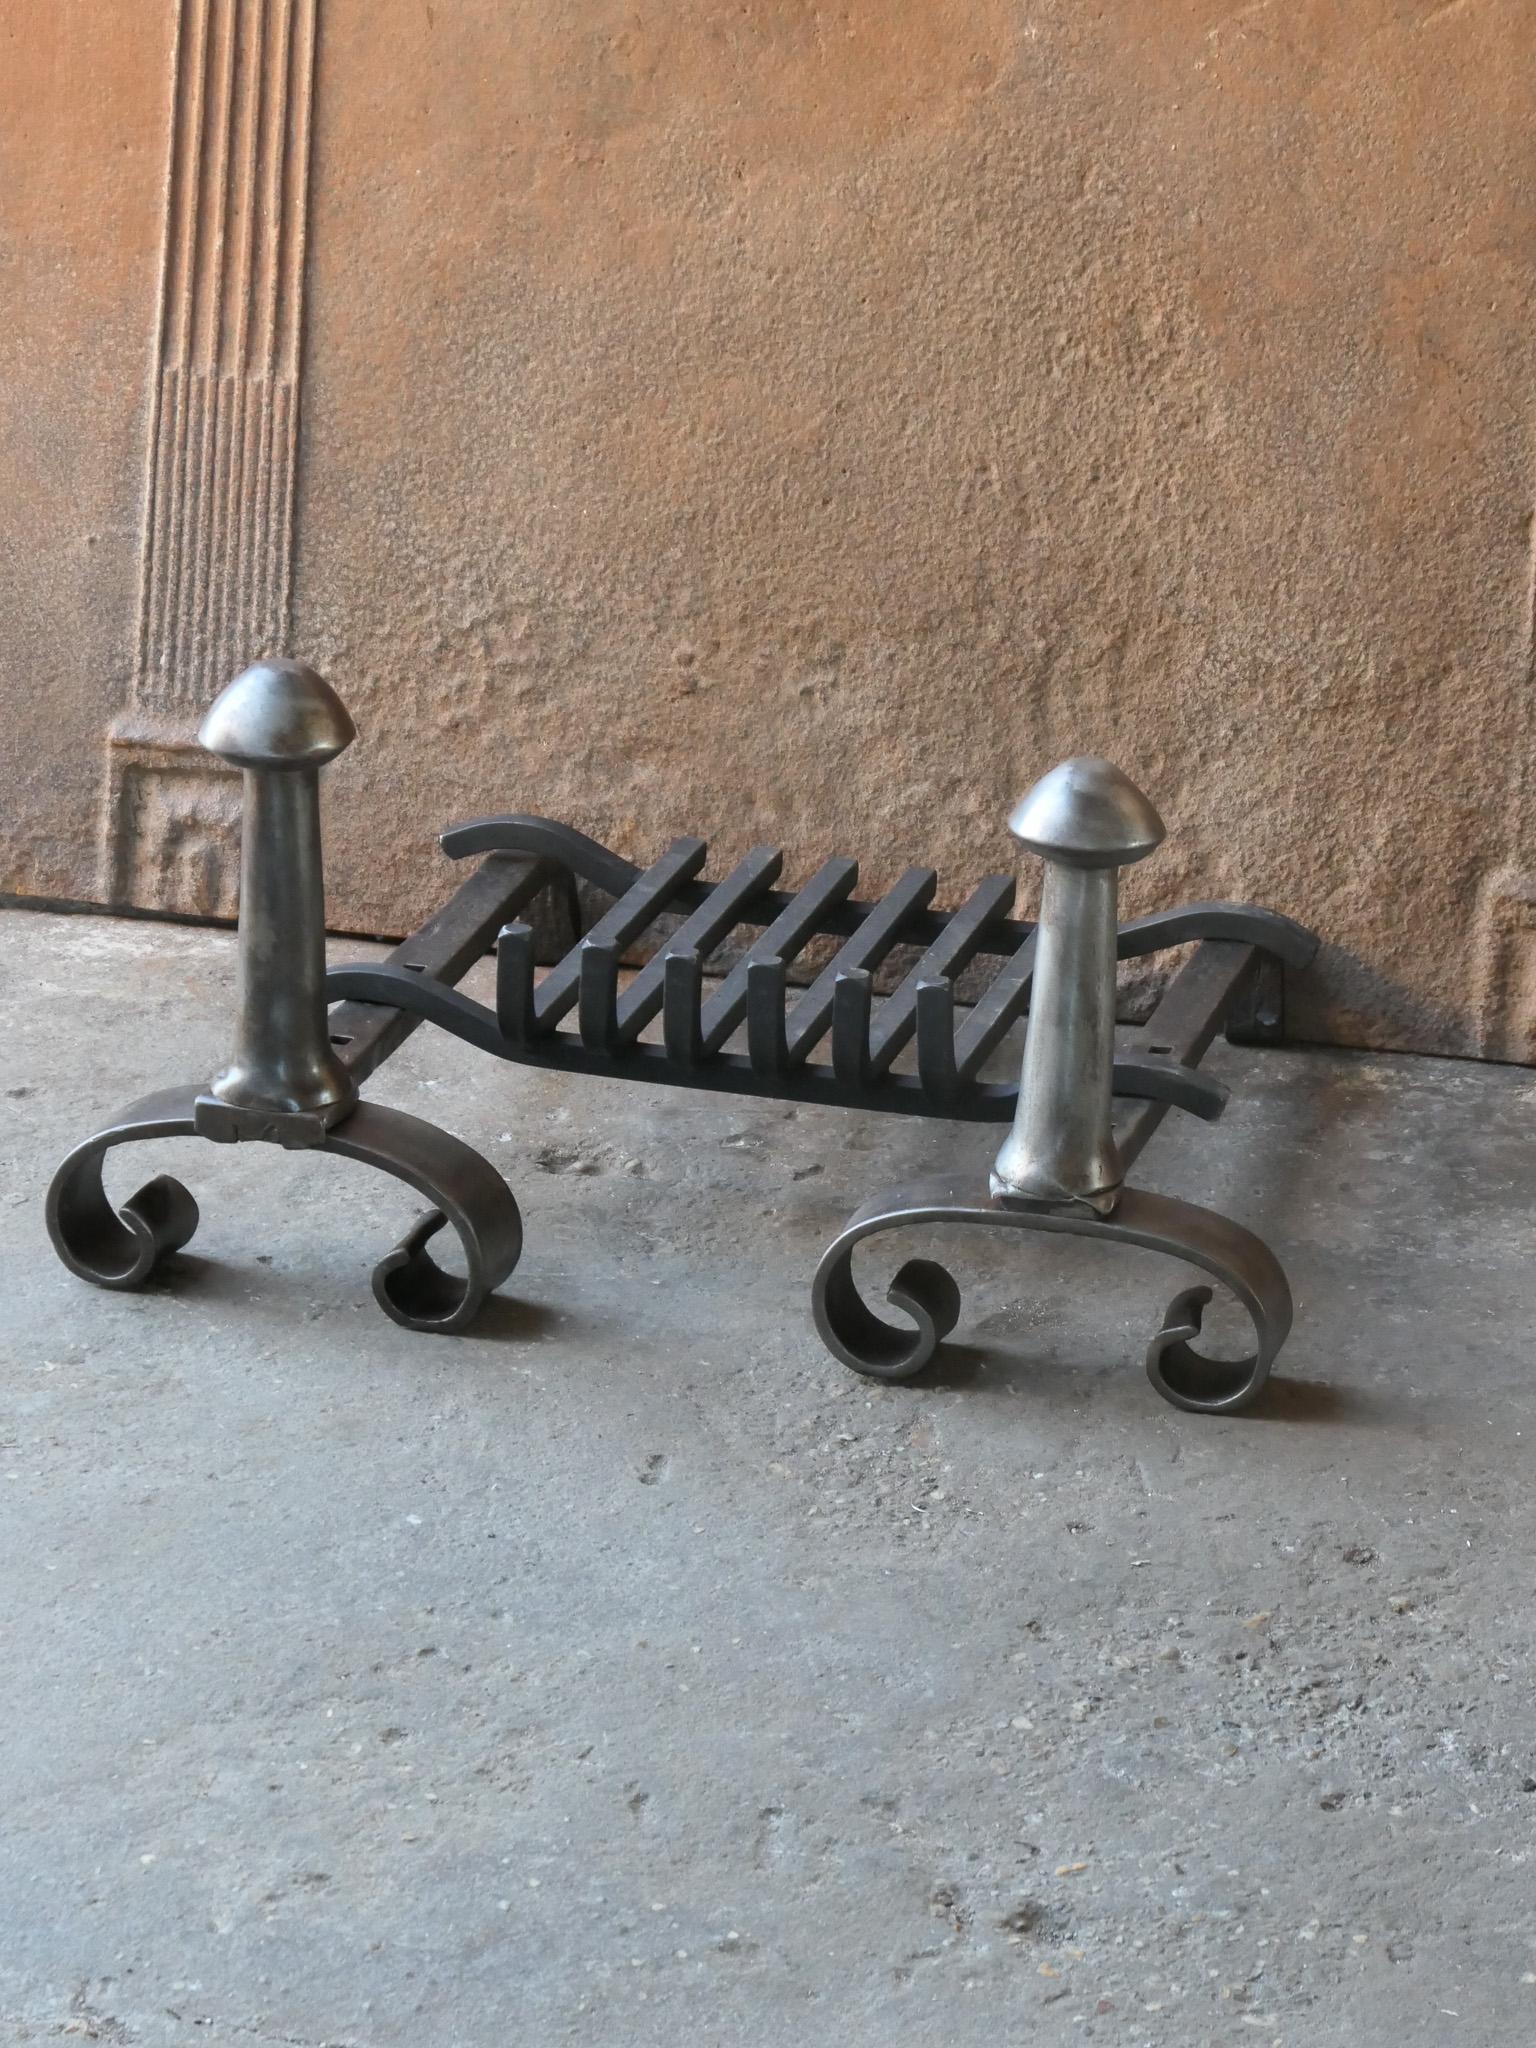 Wrought Iron Antique French Napoleon III Fire Grate, Fireplace Grate, 19th Century For Sale